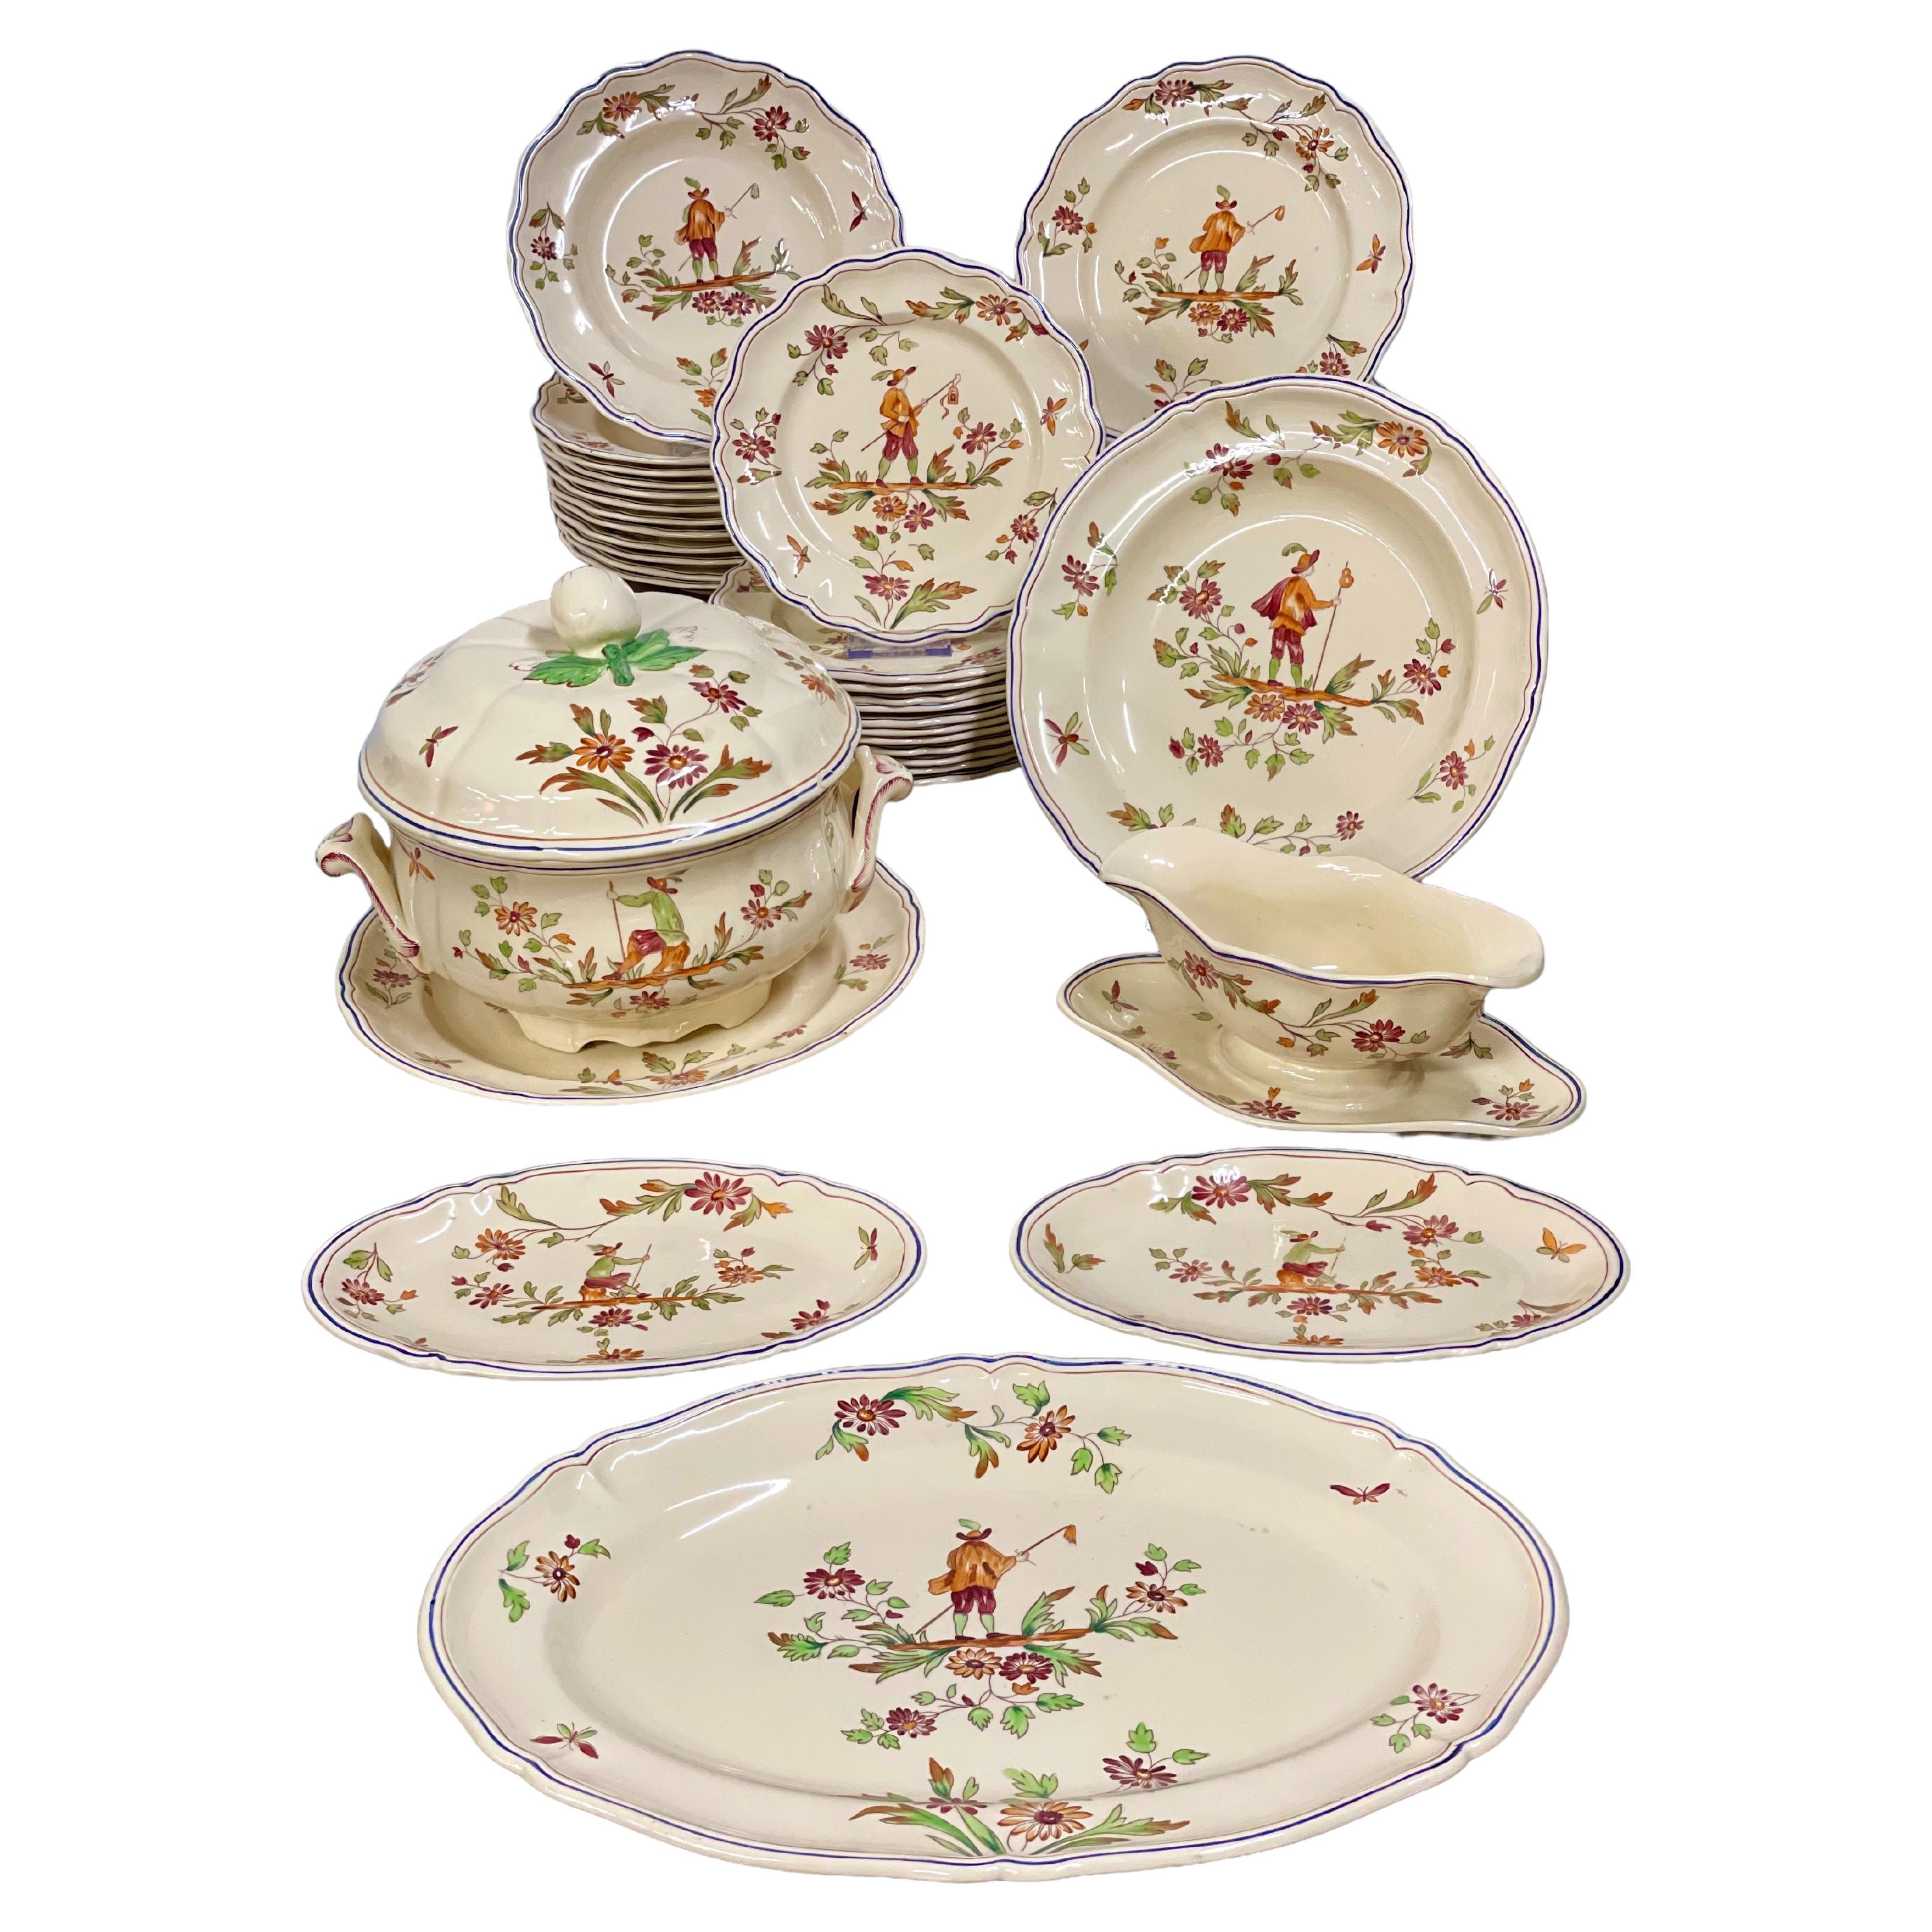 "Moustiers" by Longchamp French Faience Dinner Service for 12 